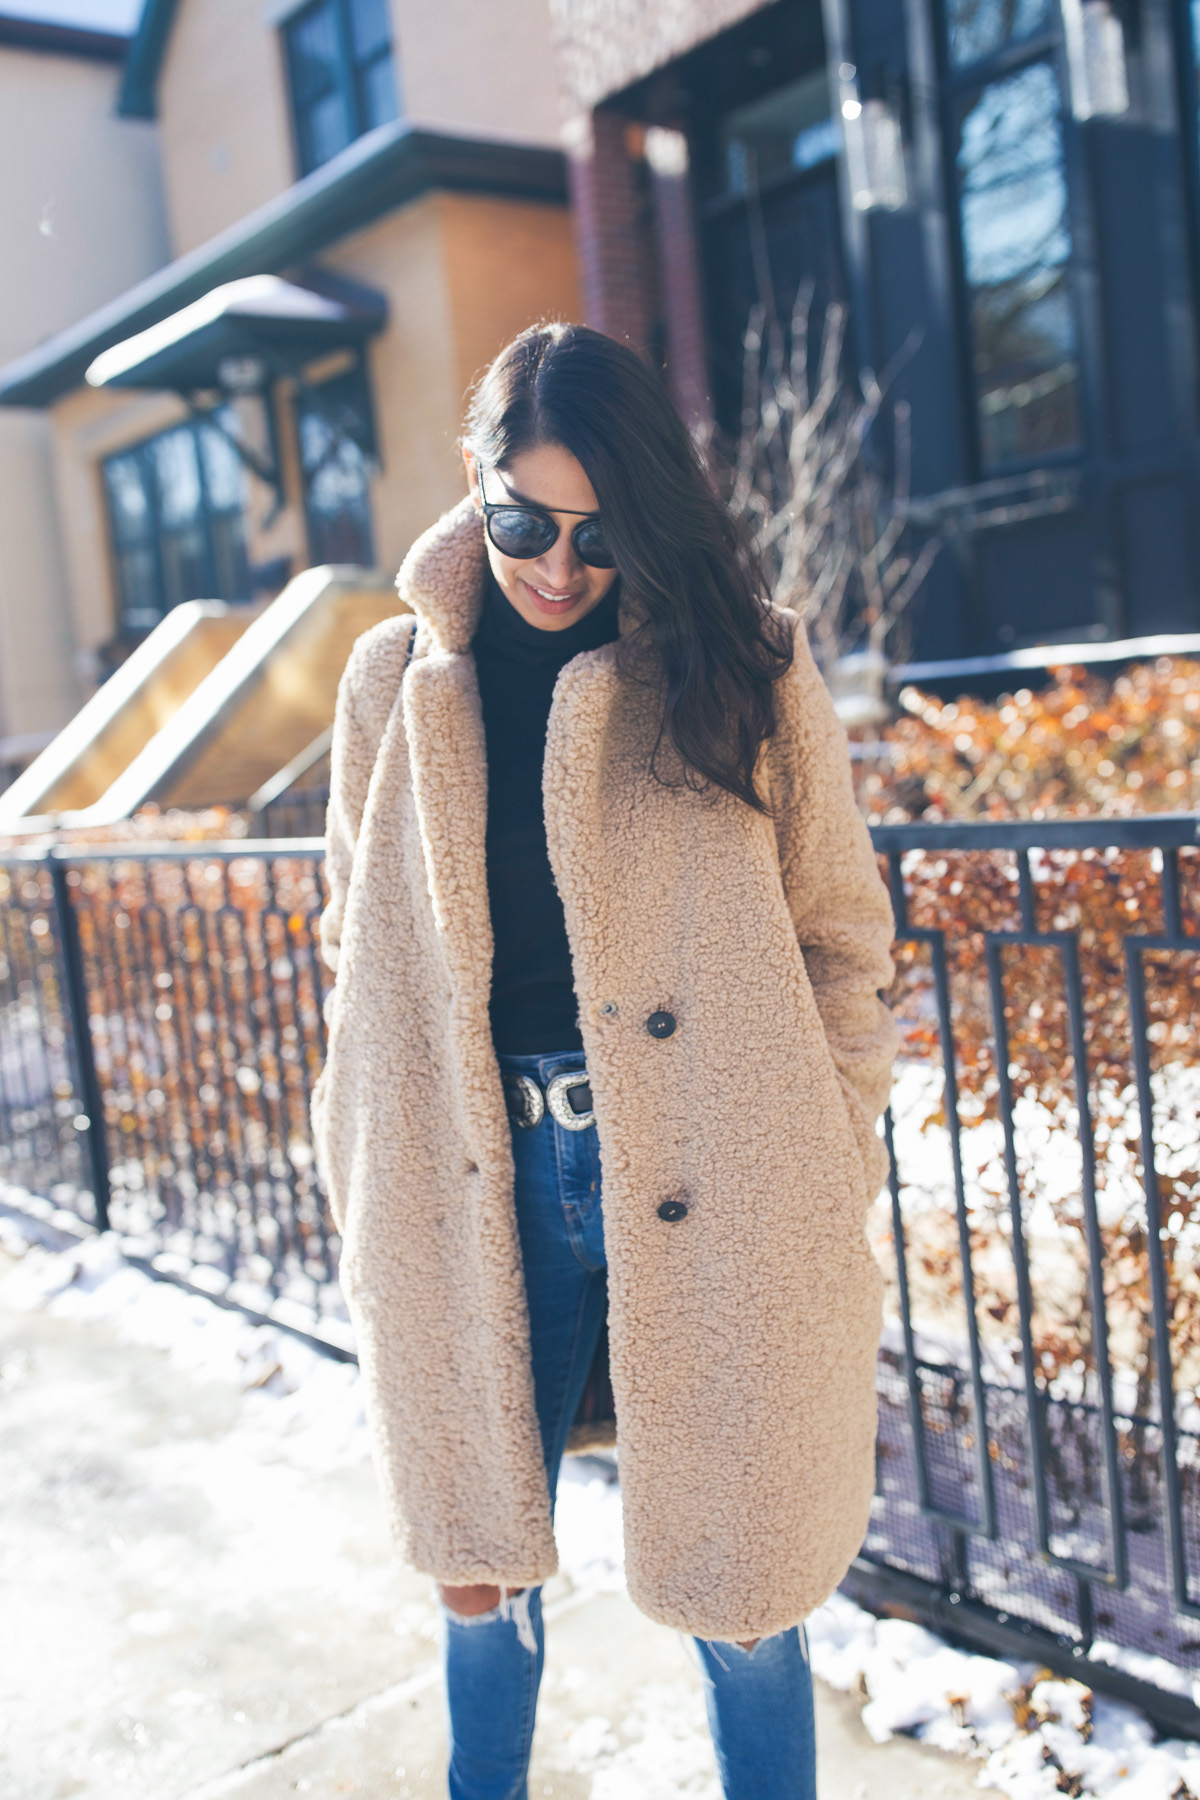 Trend Alert: My Favorite Teddy Coats, Lows to Luxe